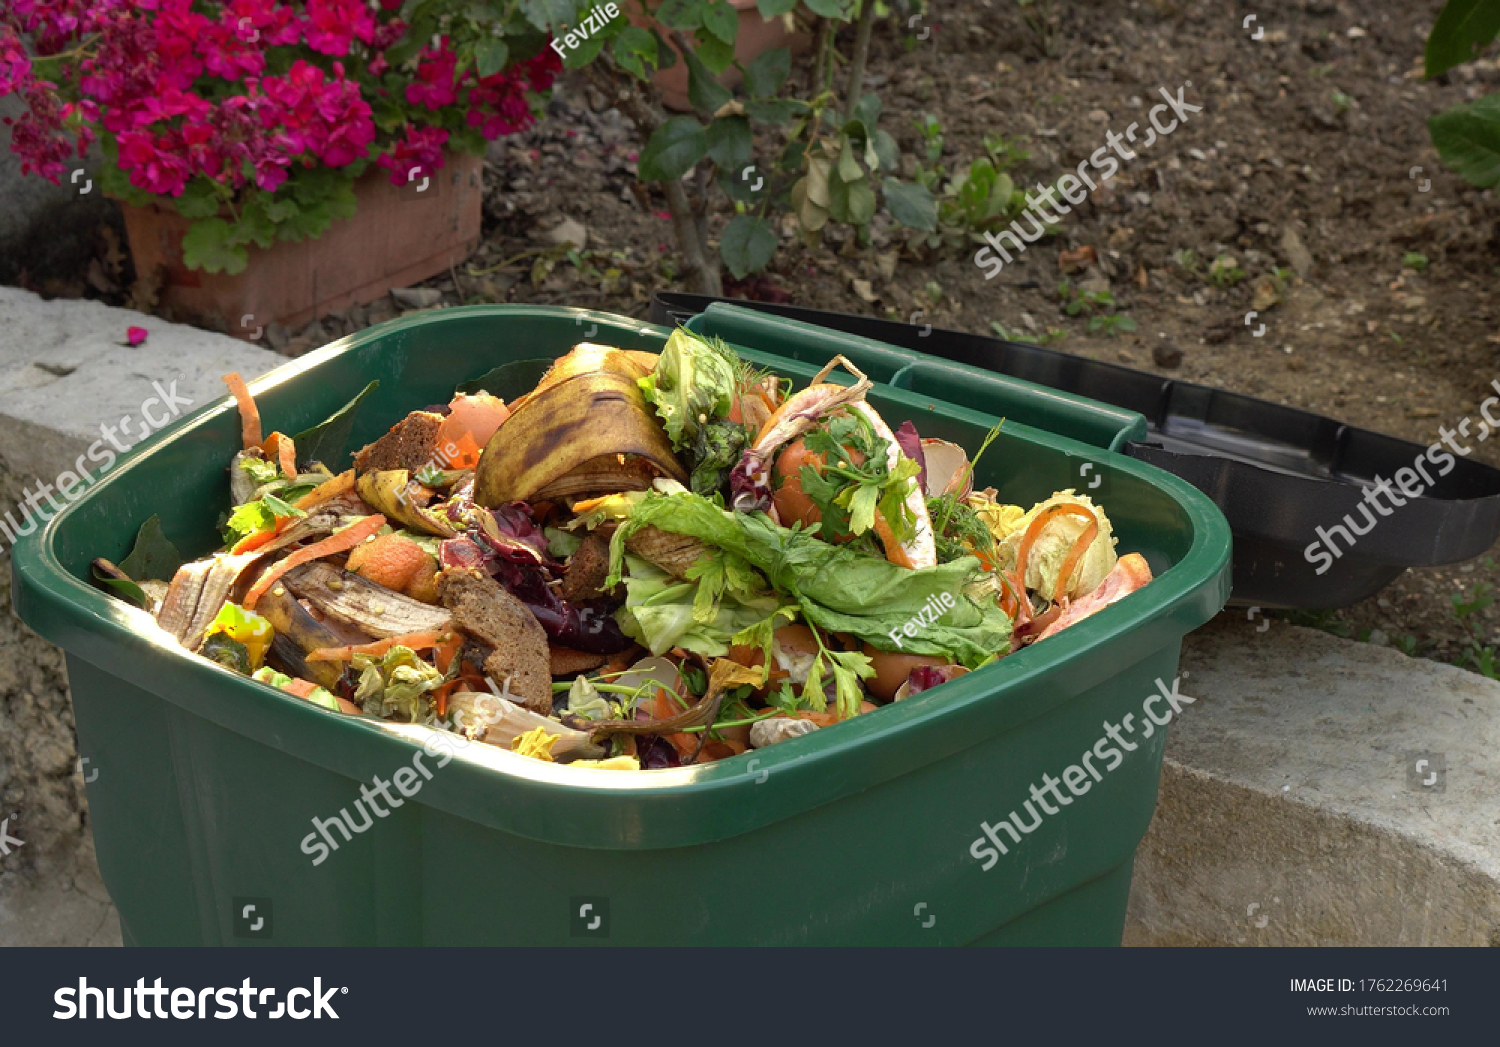 Stock Photo A Bin Filled With Materials That Comprise Green Waste Such As Kitchen Food Wastes And Plant 1762269641 